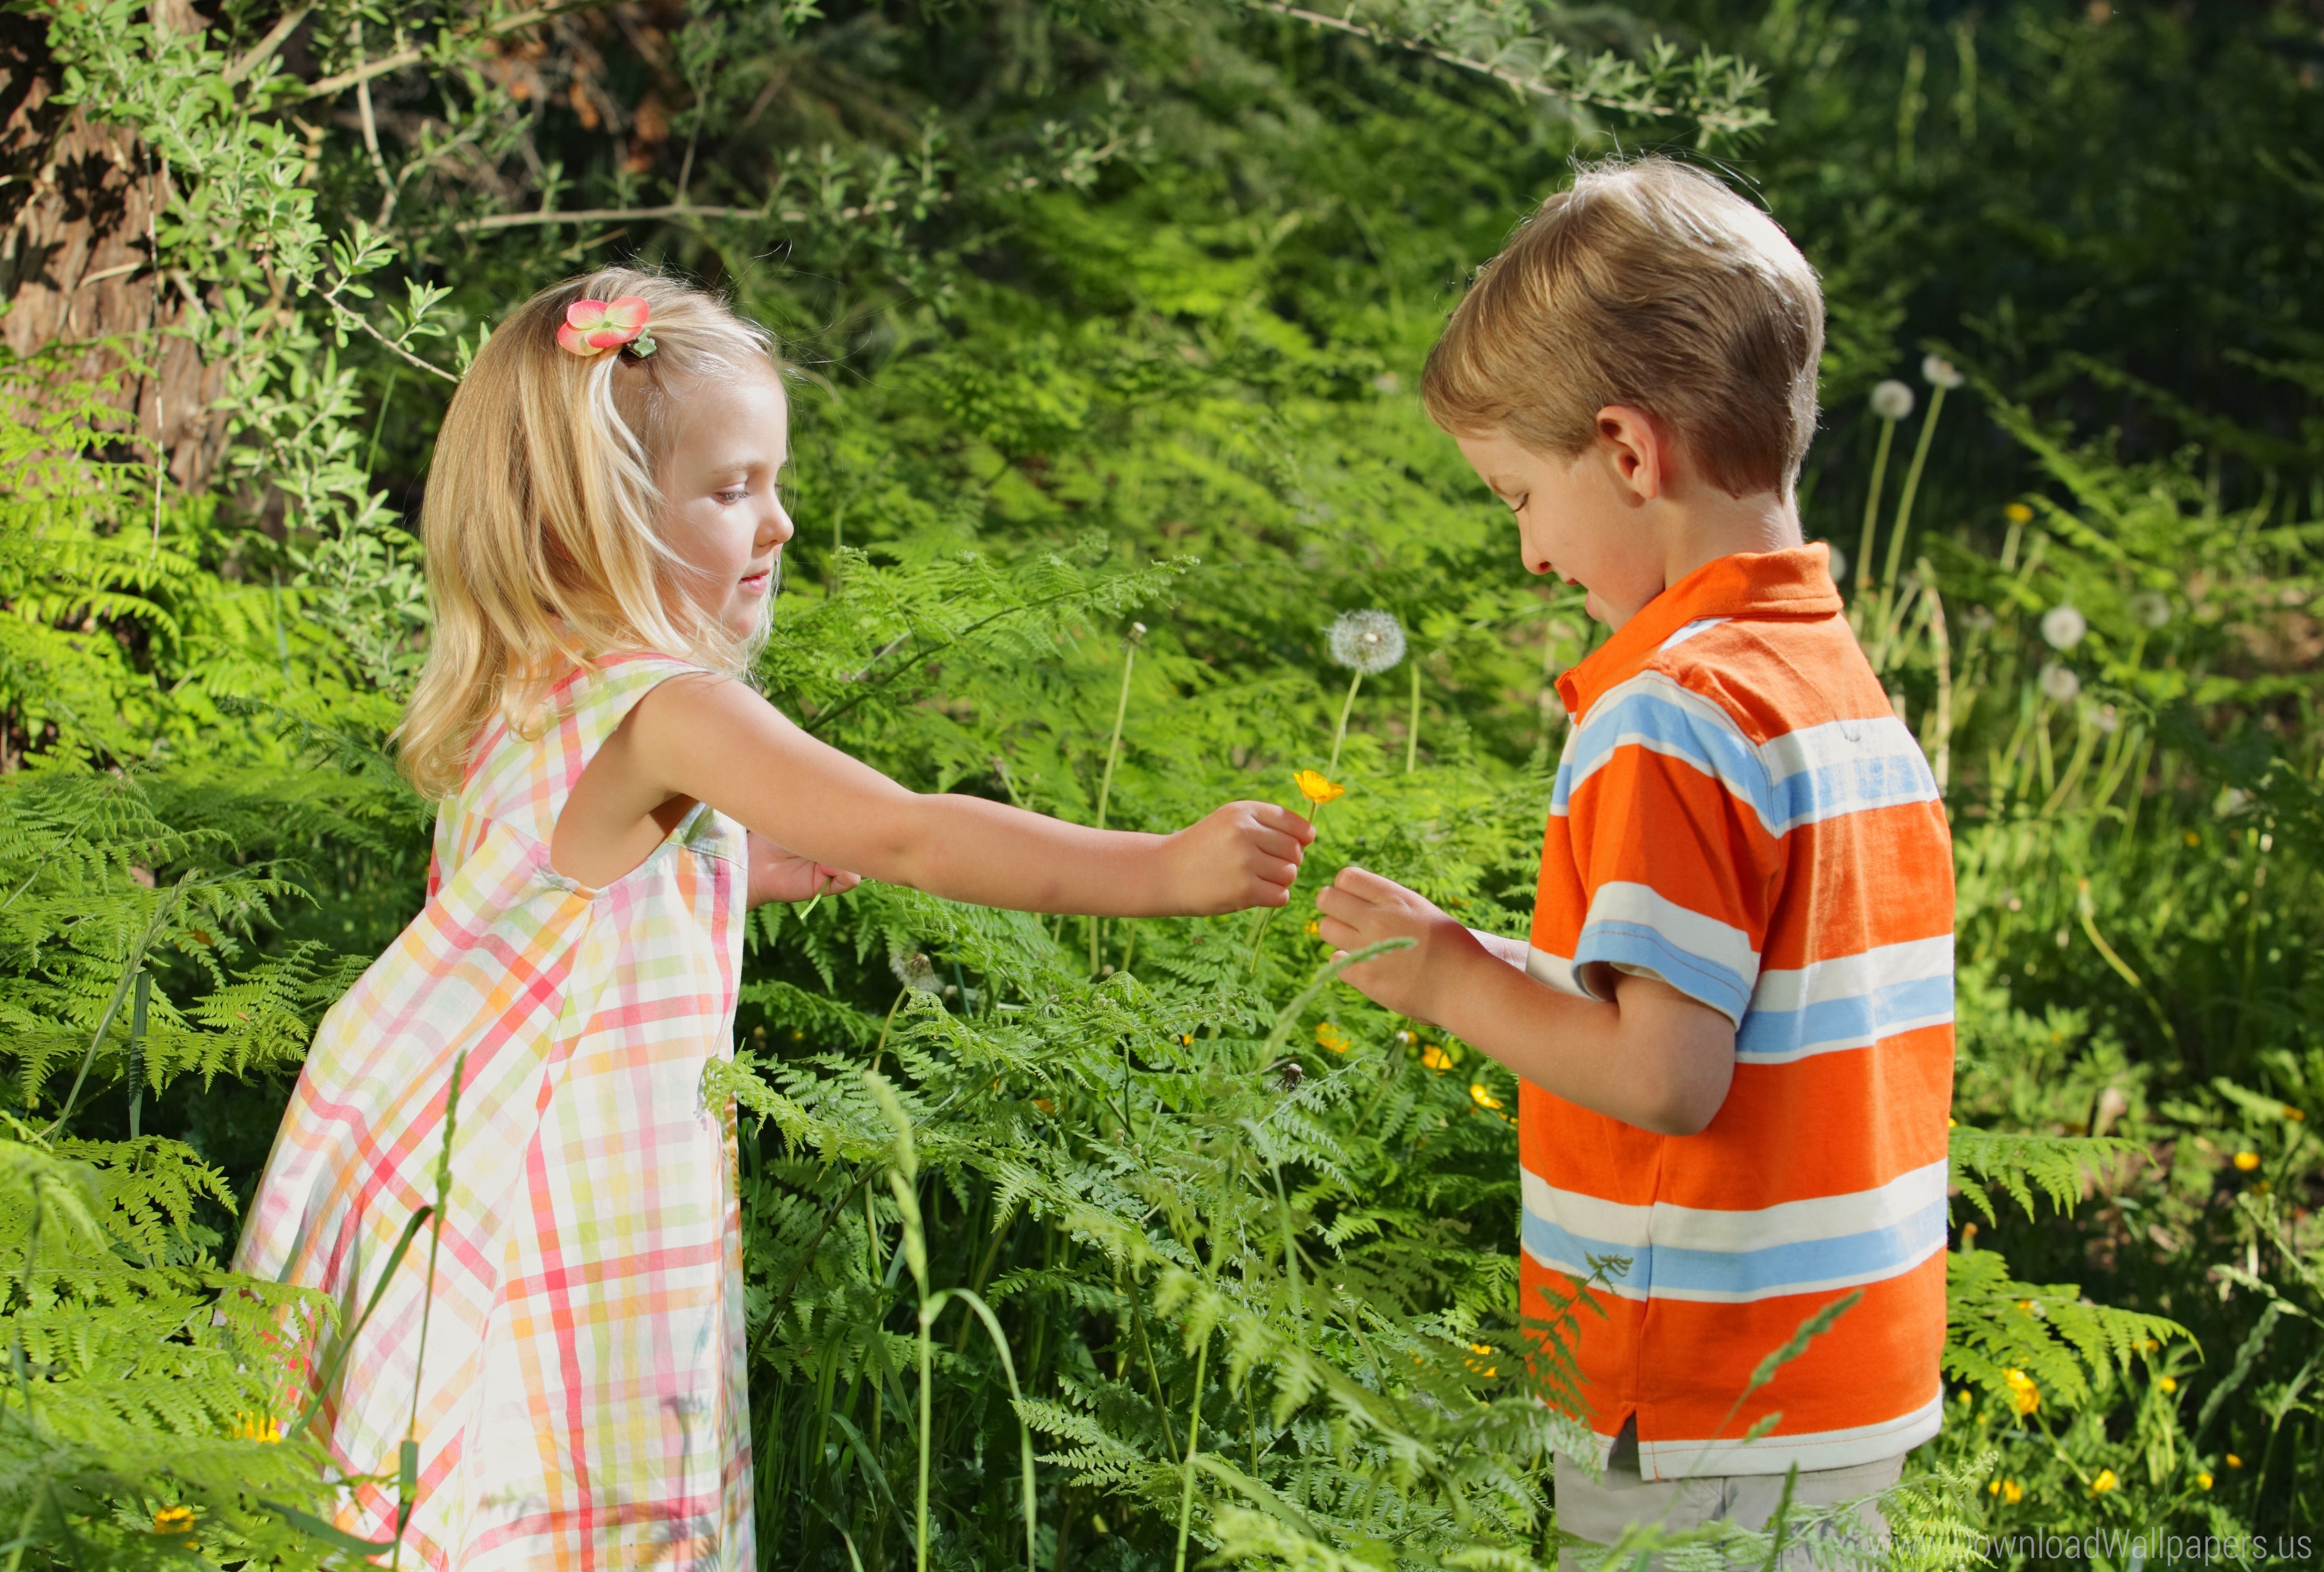 Download Original Size - Girl Giving Flowers To Boy , HD Wallpaper & Backgrounds